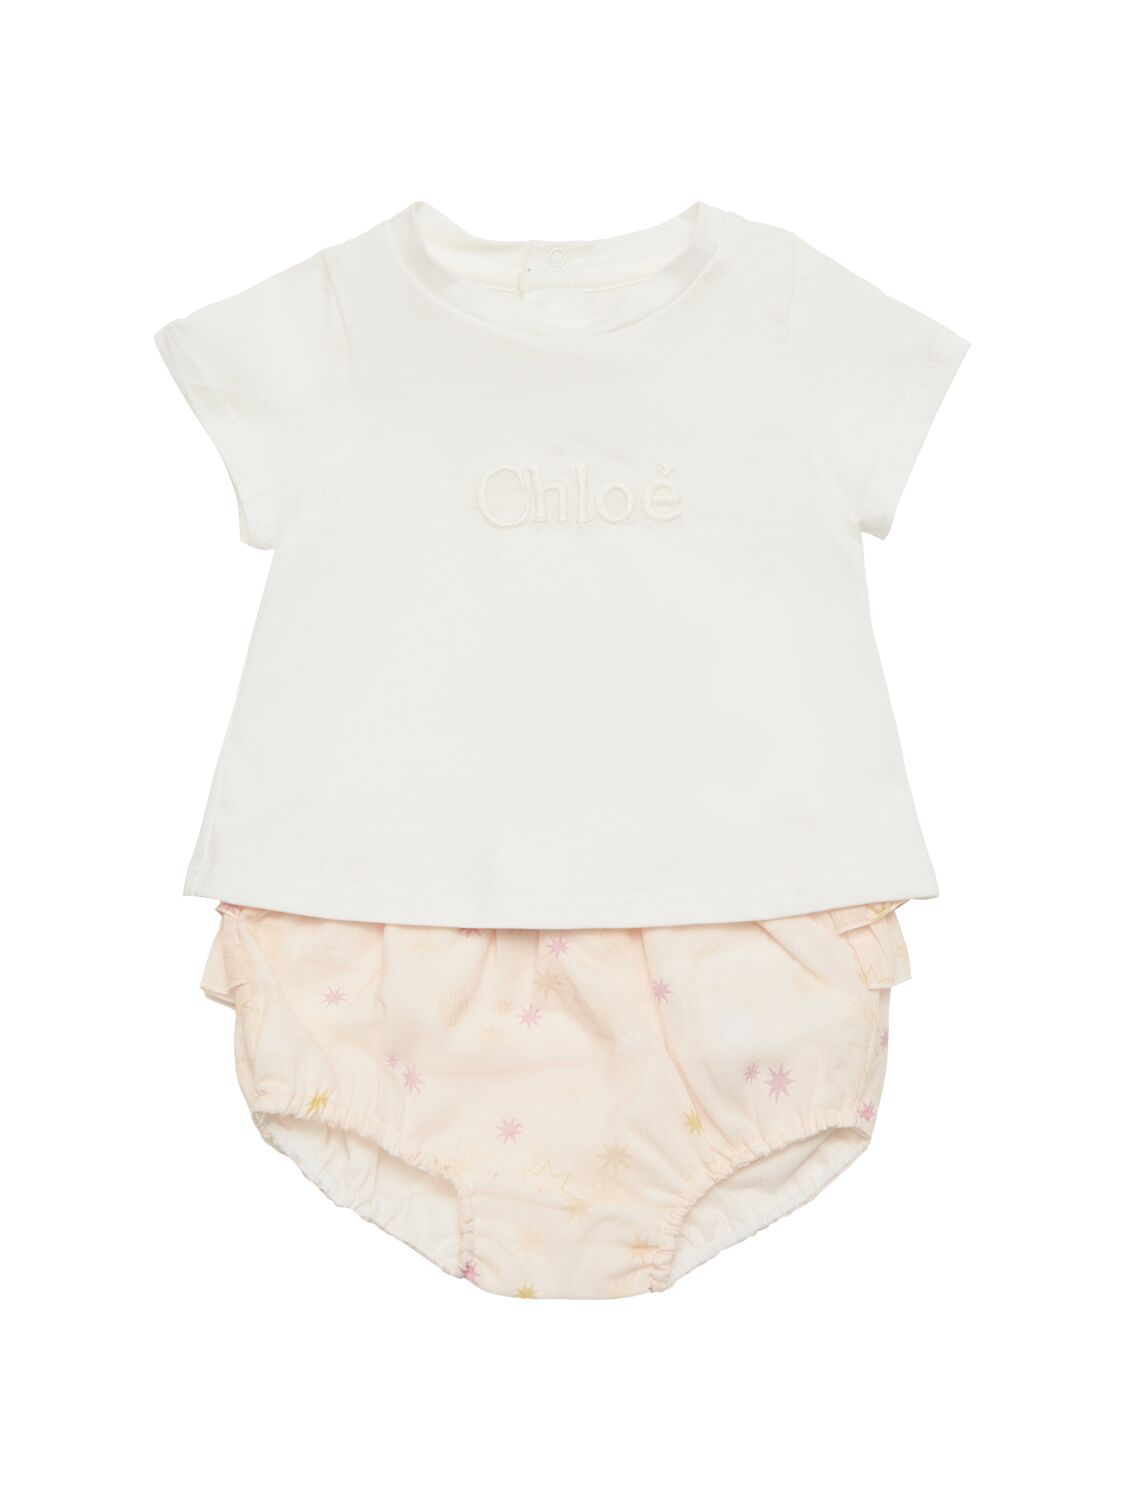 Image of Organic Cotton T-shirt & 2 Diaper Covers